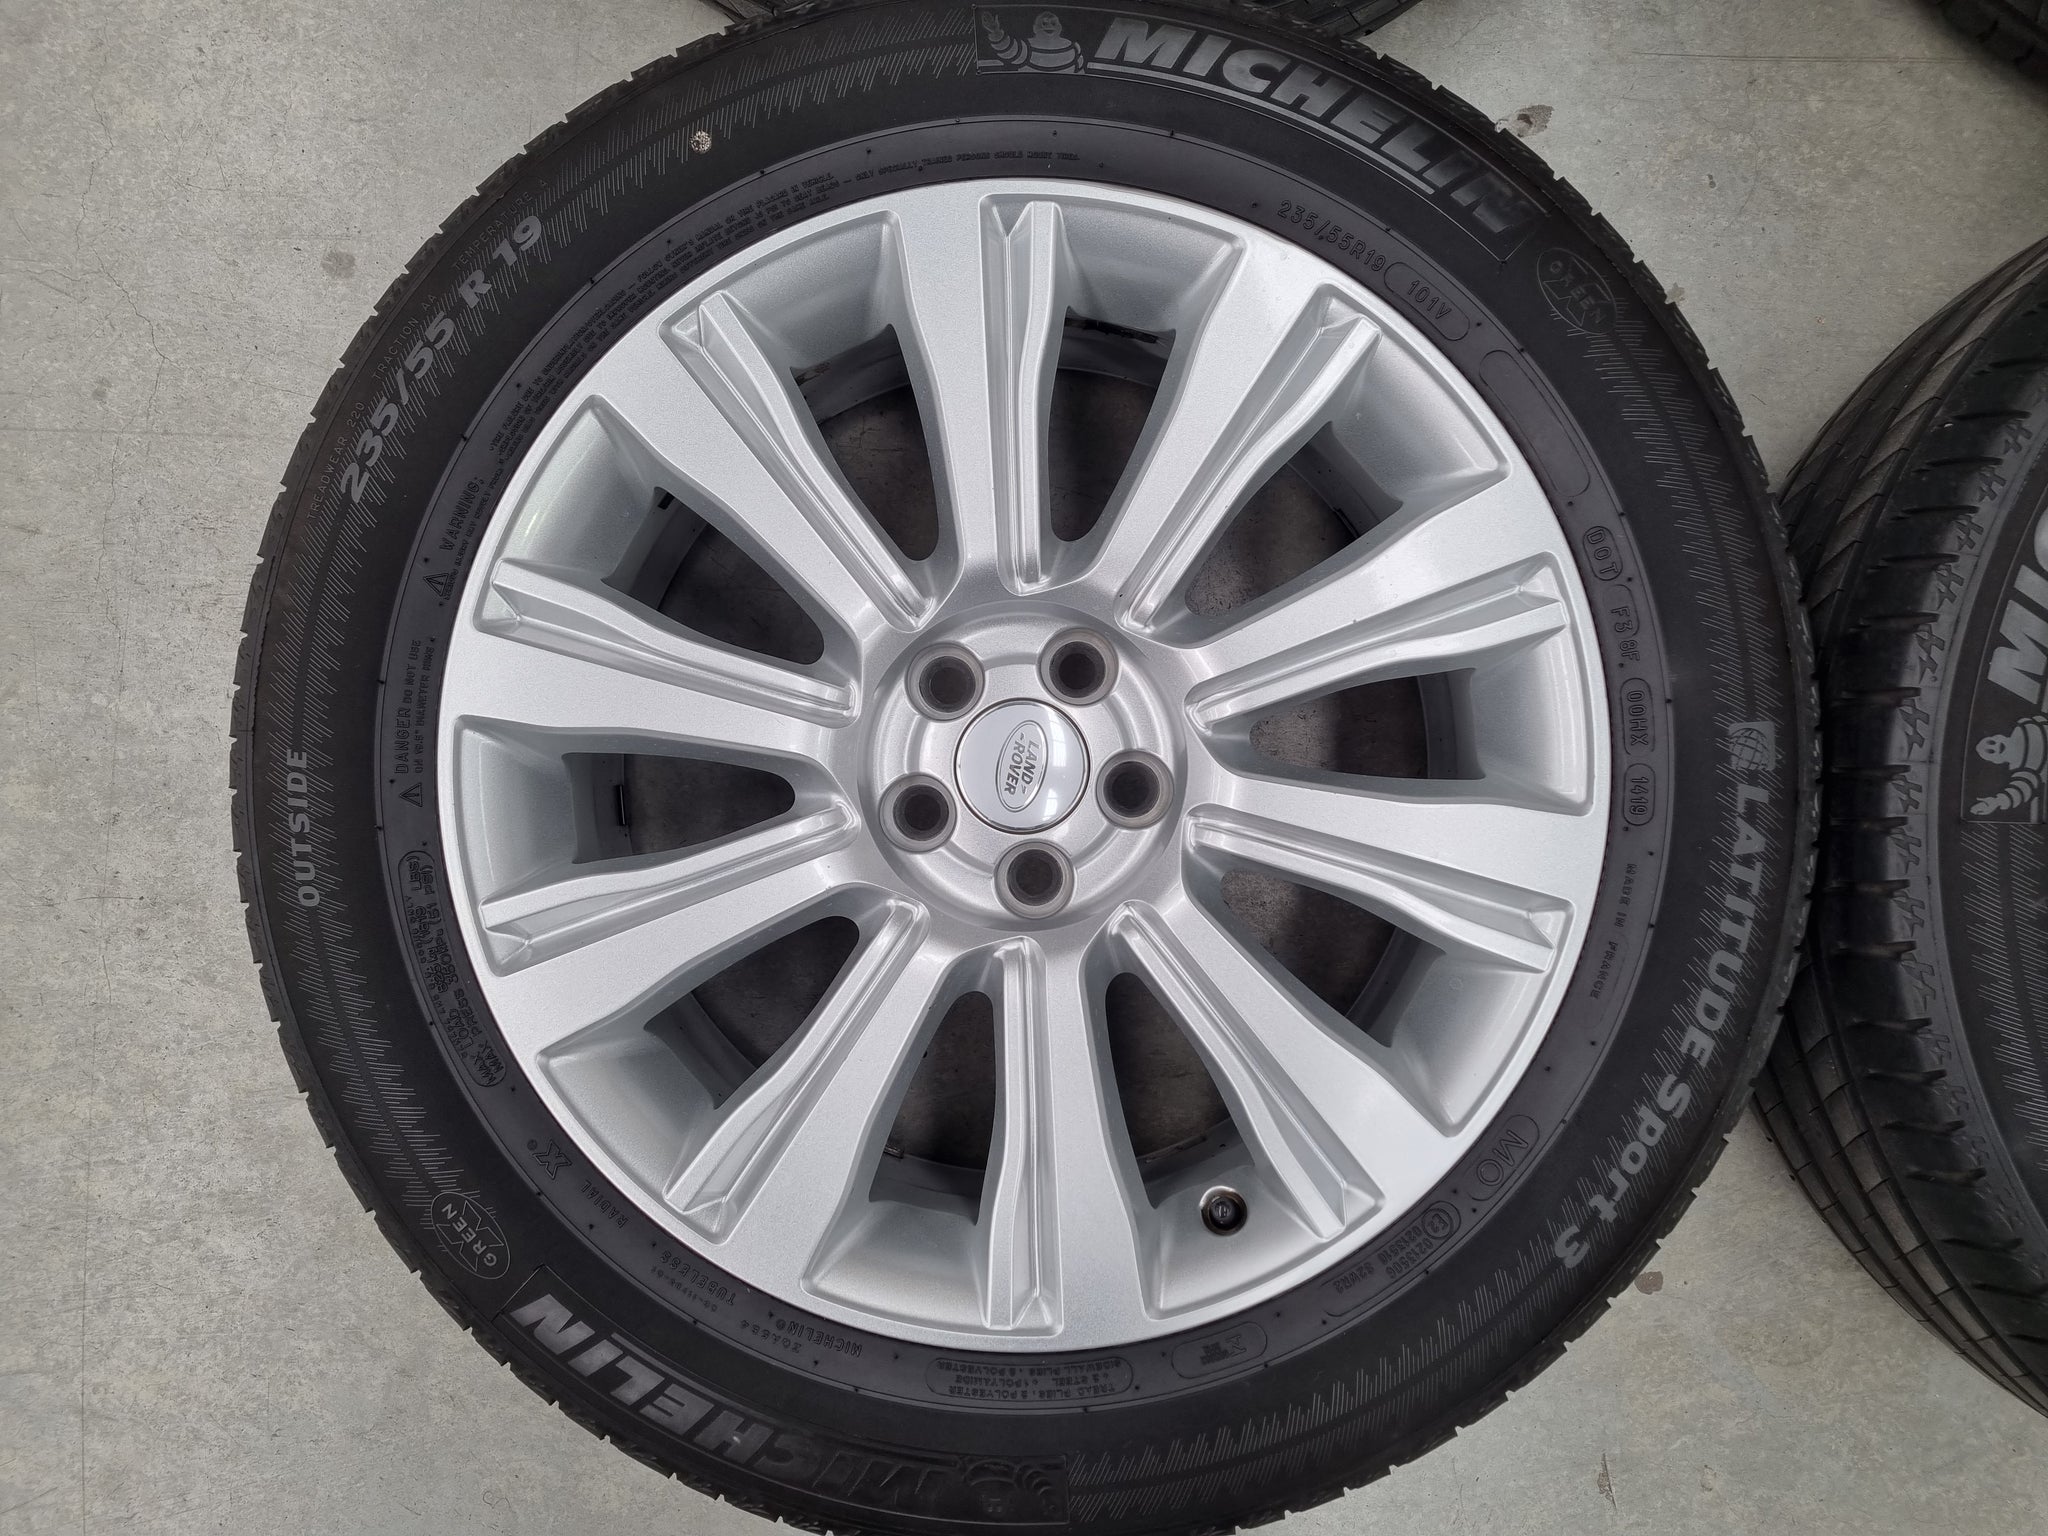 Load image into Gallery viewer, Genuine Range Rover Evoque EJ32 Silver 19 Inch Wheels and Tyres Set of 4
